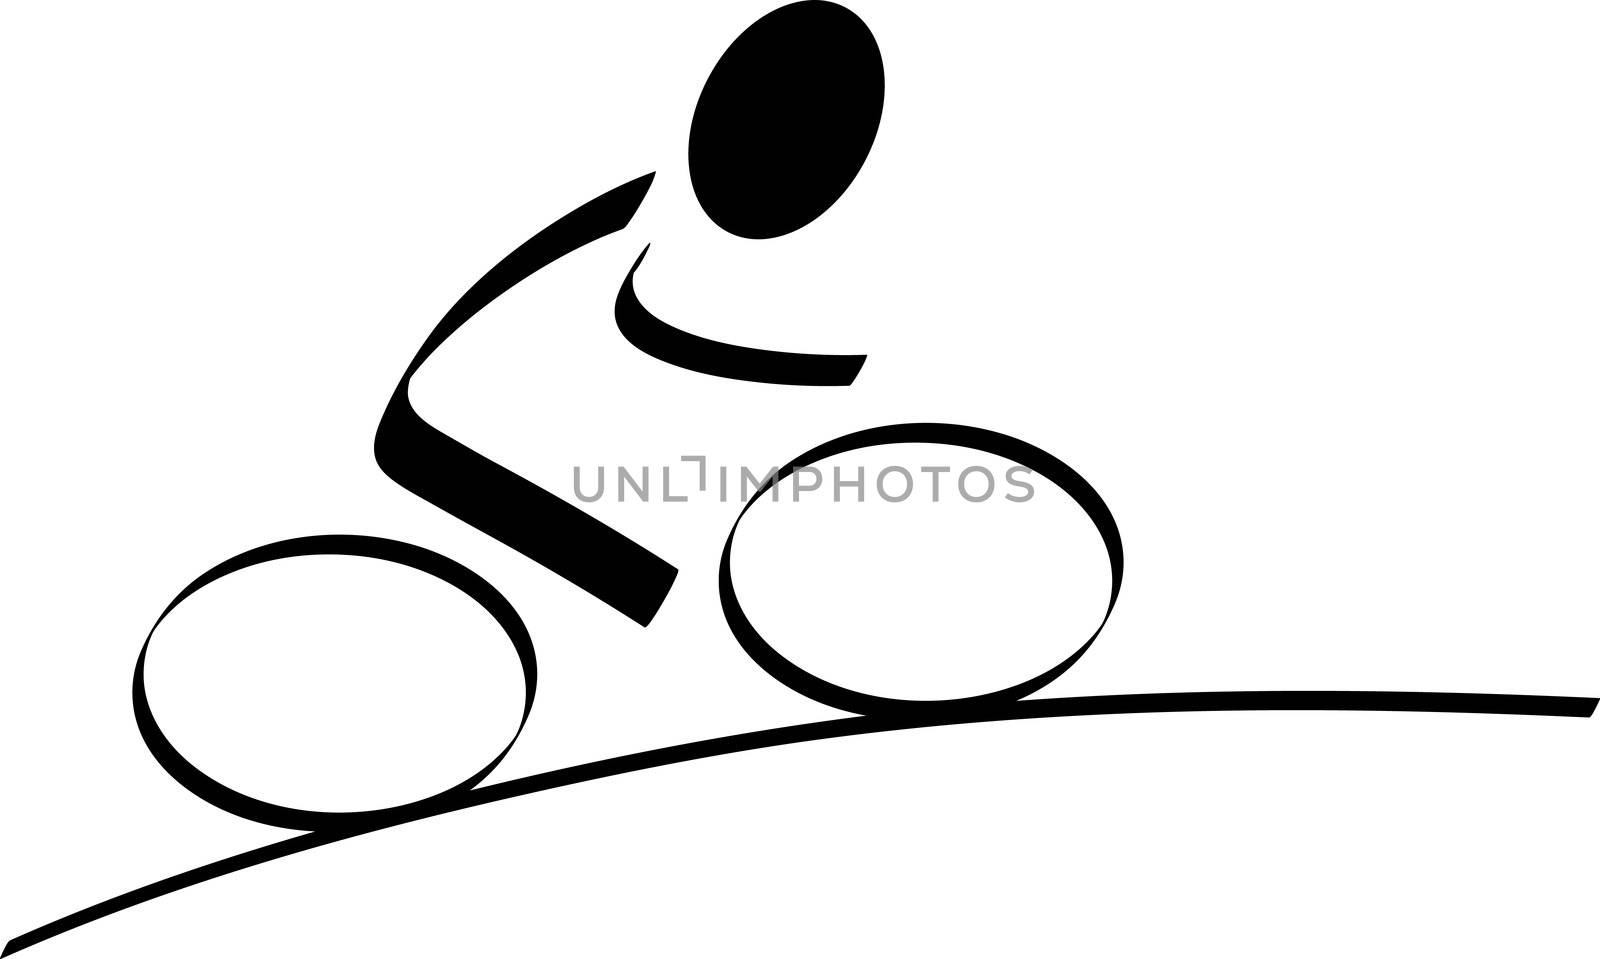 A stylized bikerider. All isolated on white background.